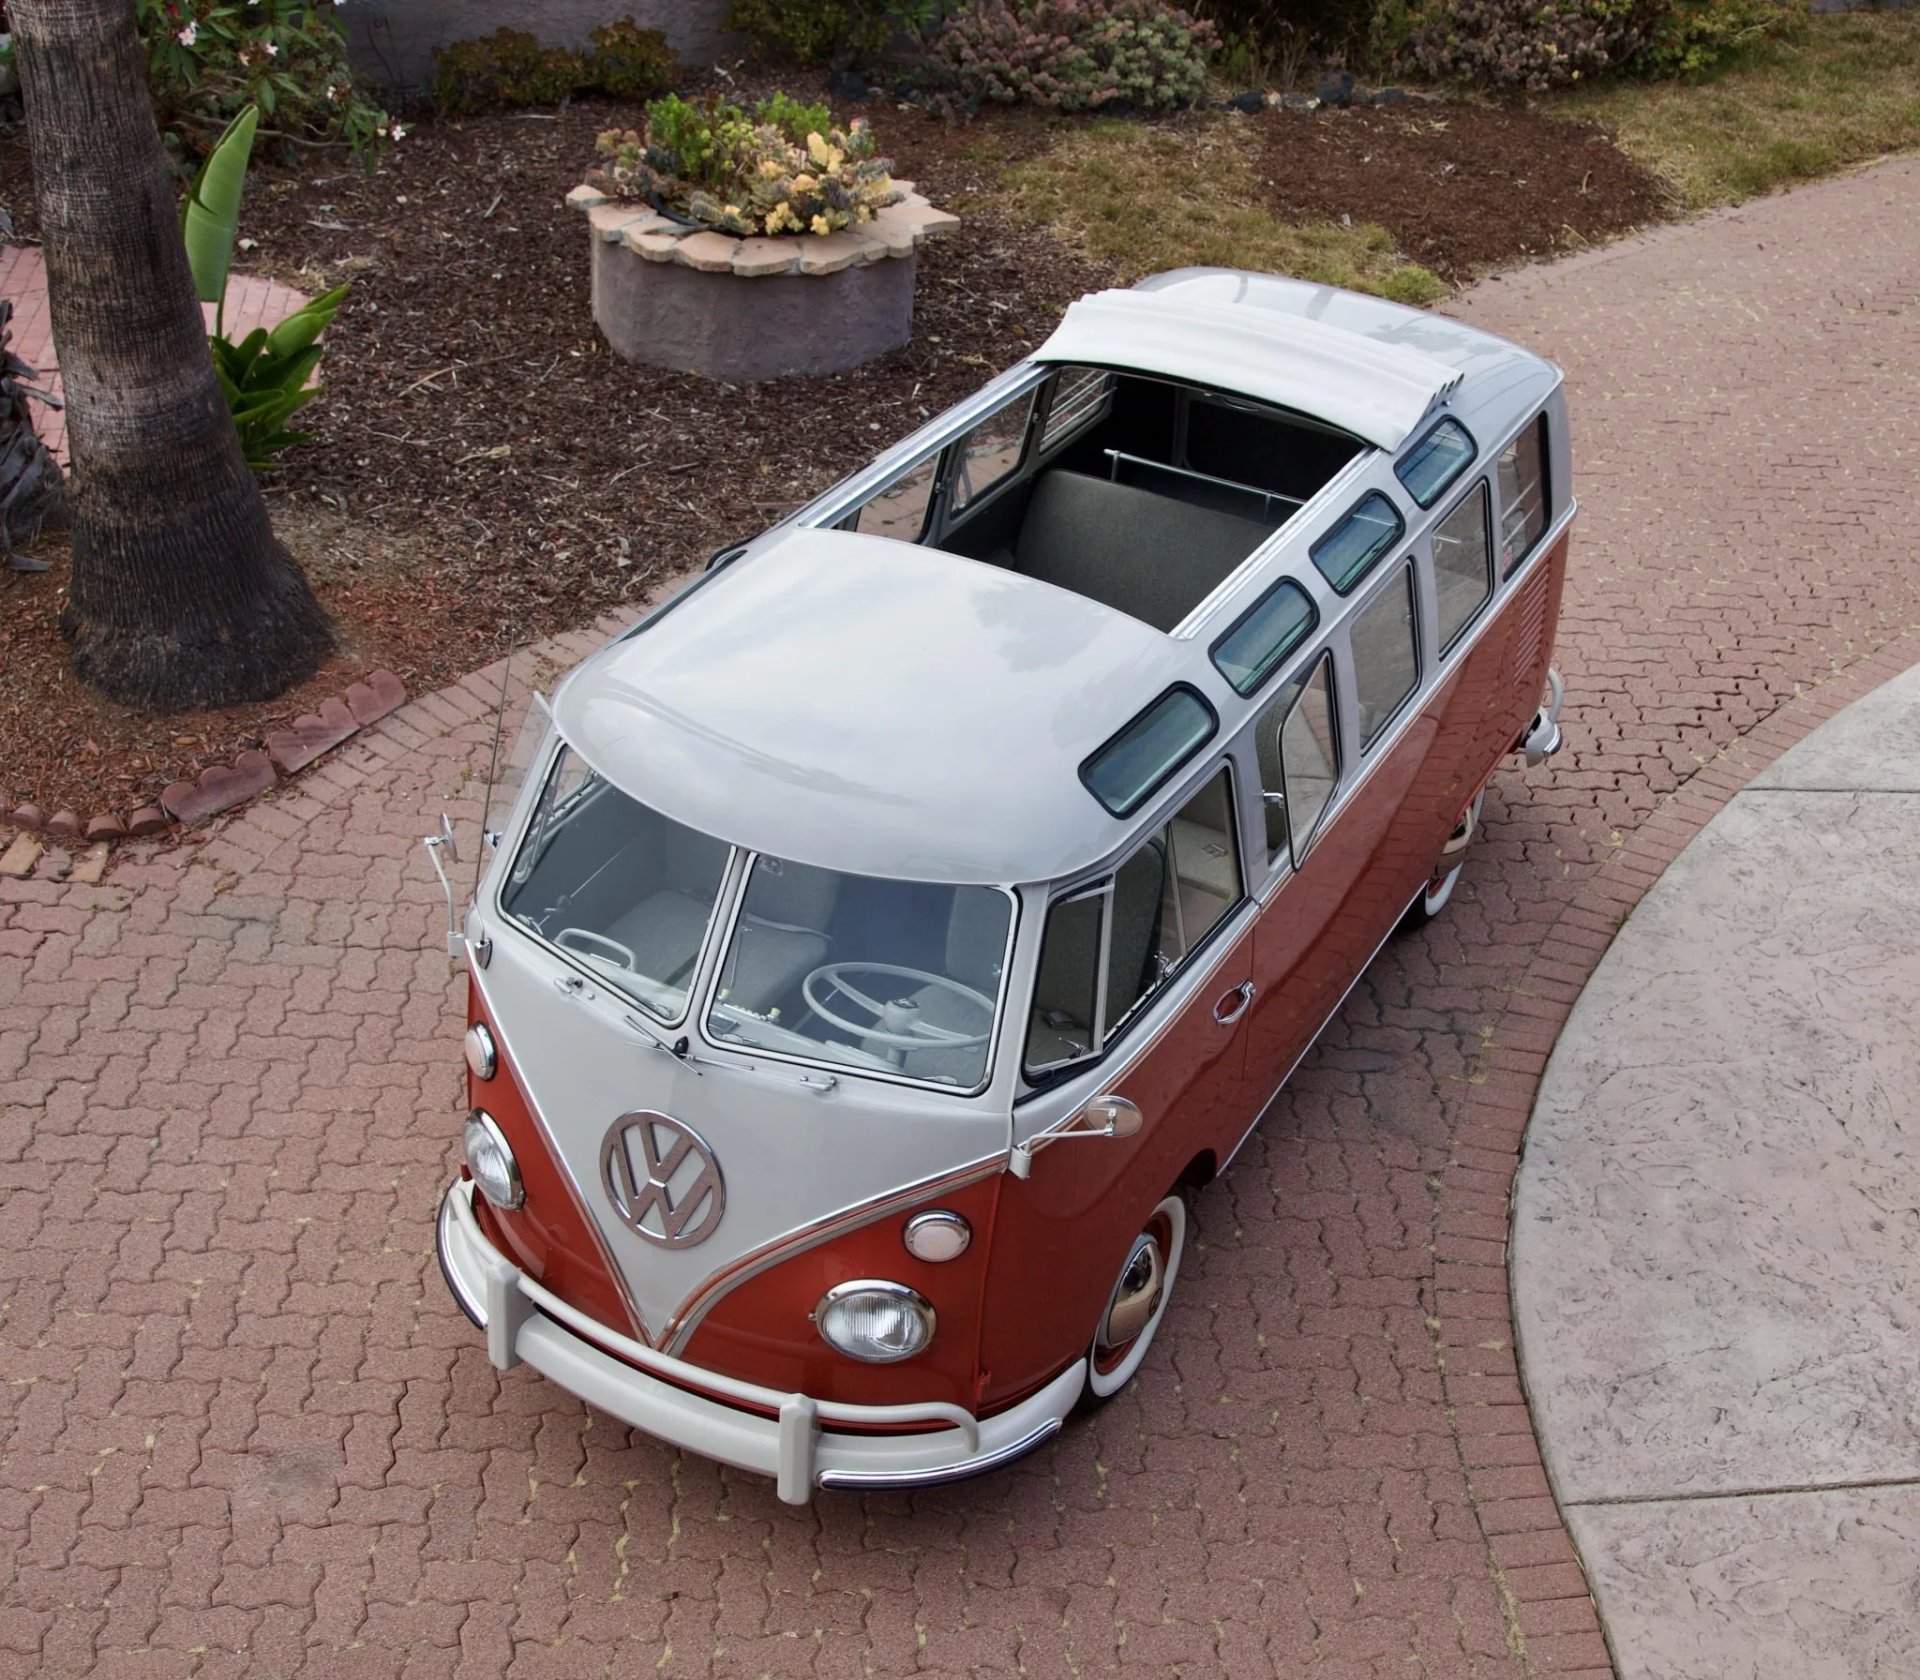 this volkswagen type 2 sunroof deluxe 21 window samba is the real deal full of surprises 13 Copia